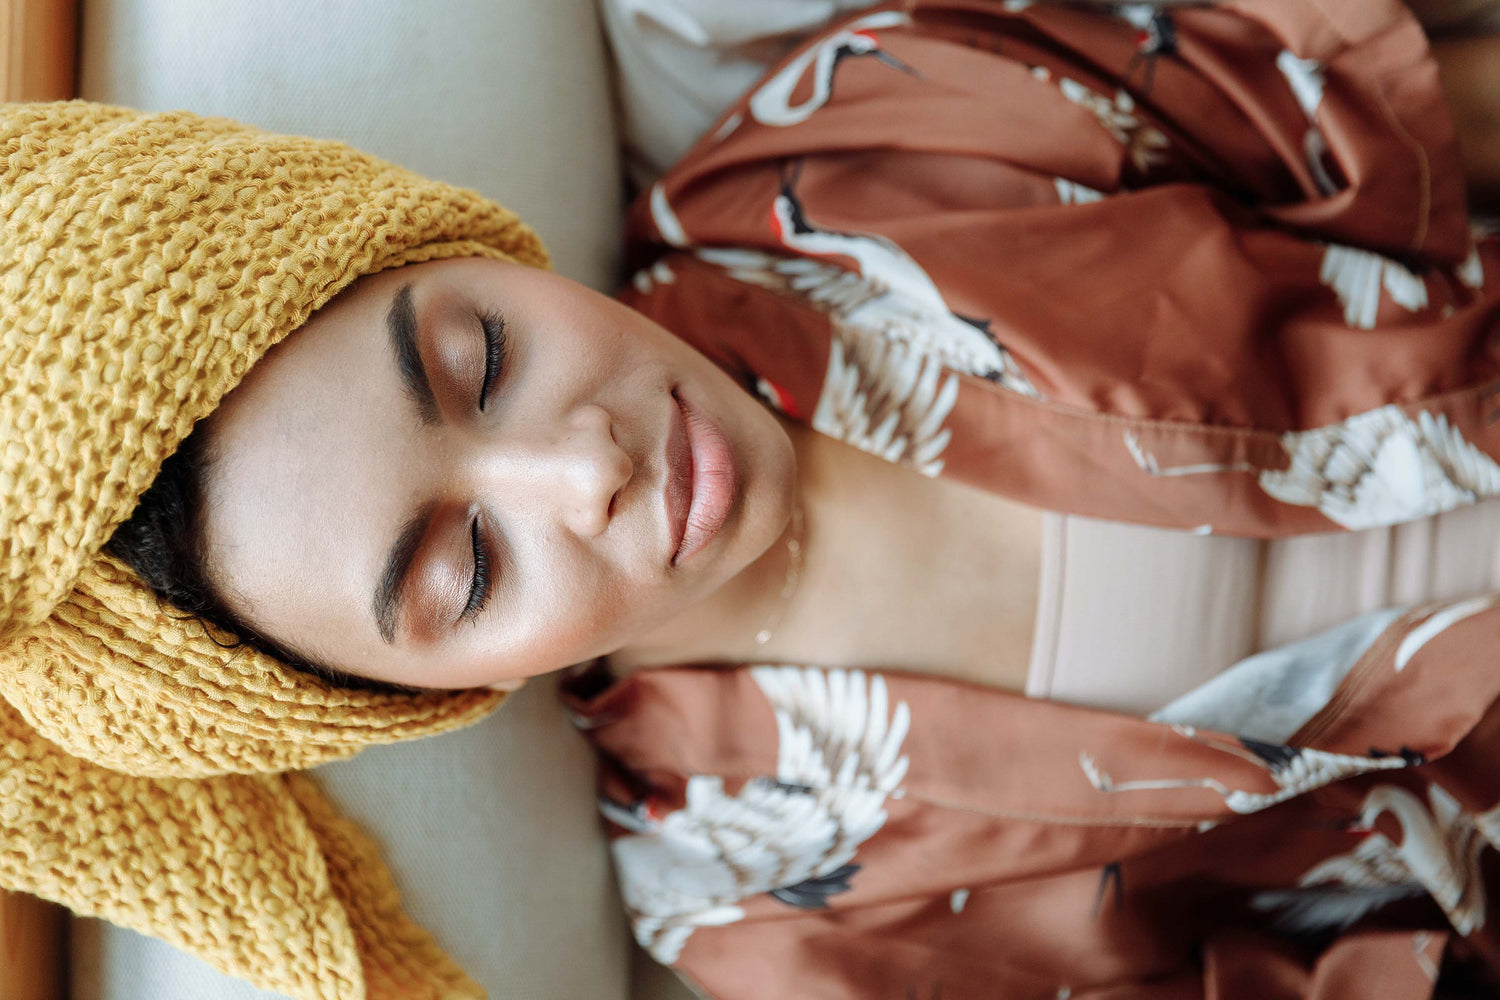 5 Steps to Sleep Better These Holidays